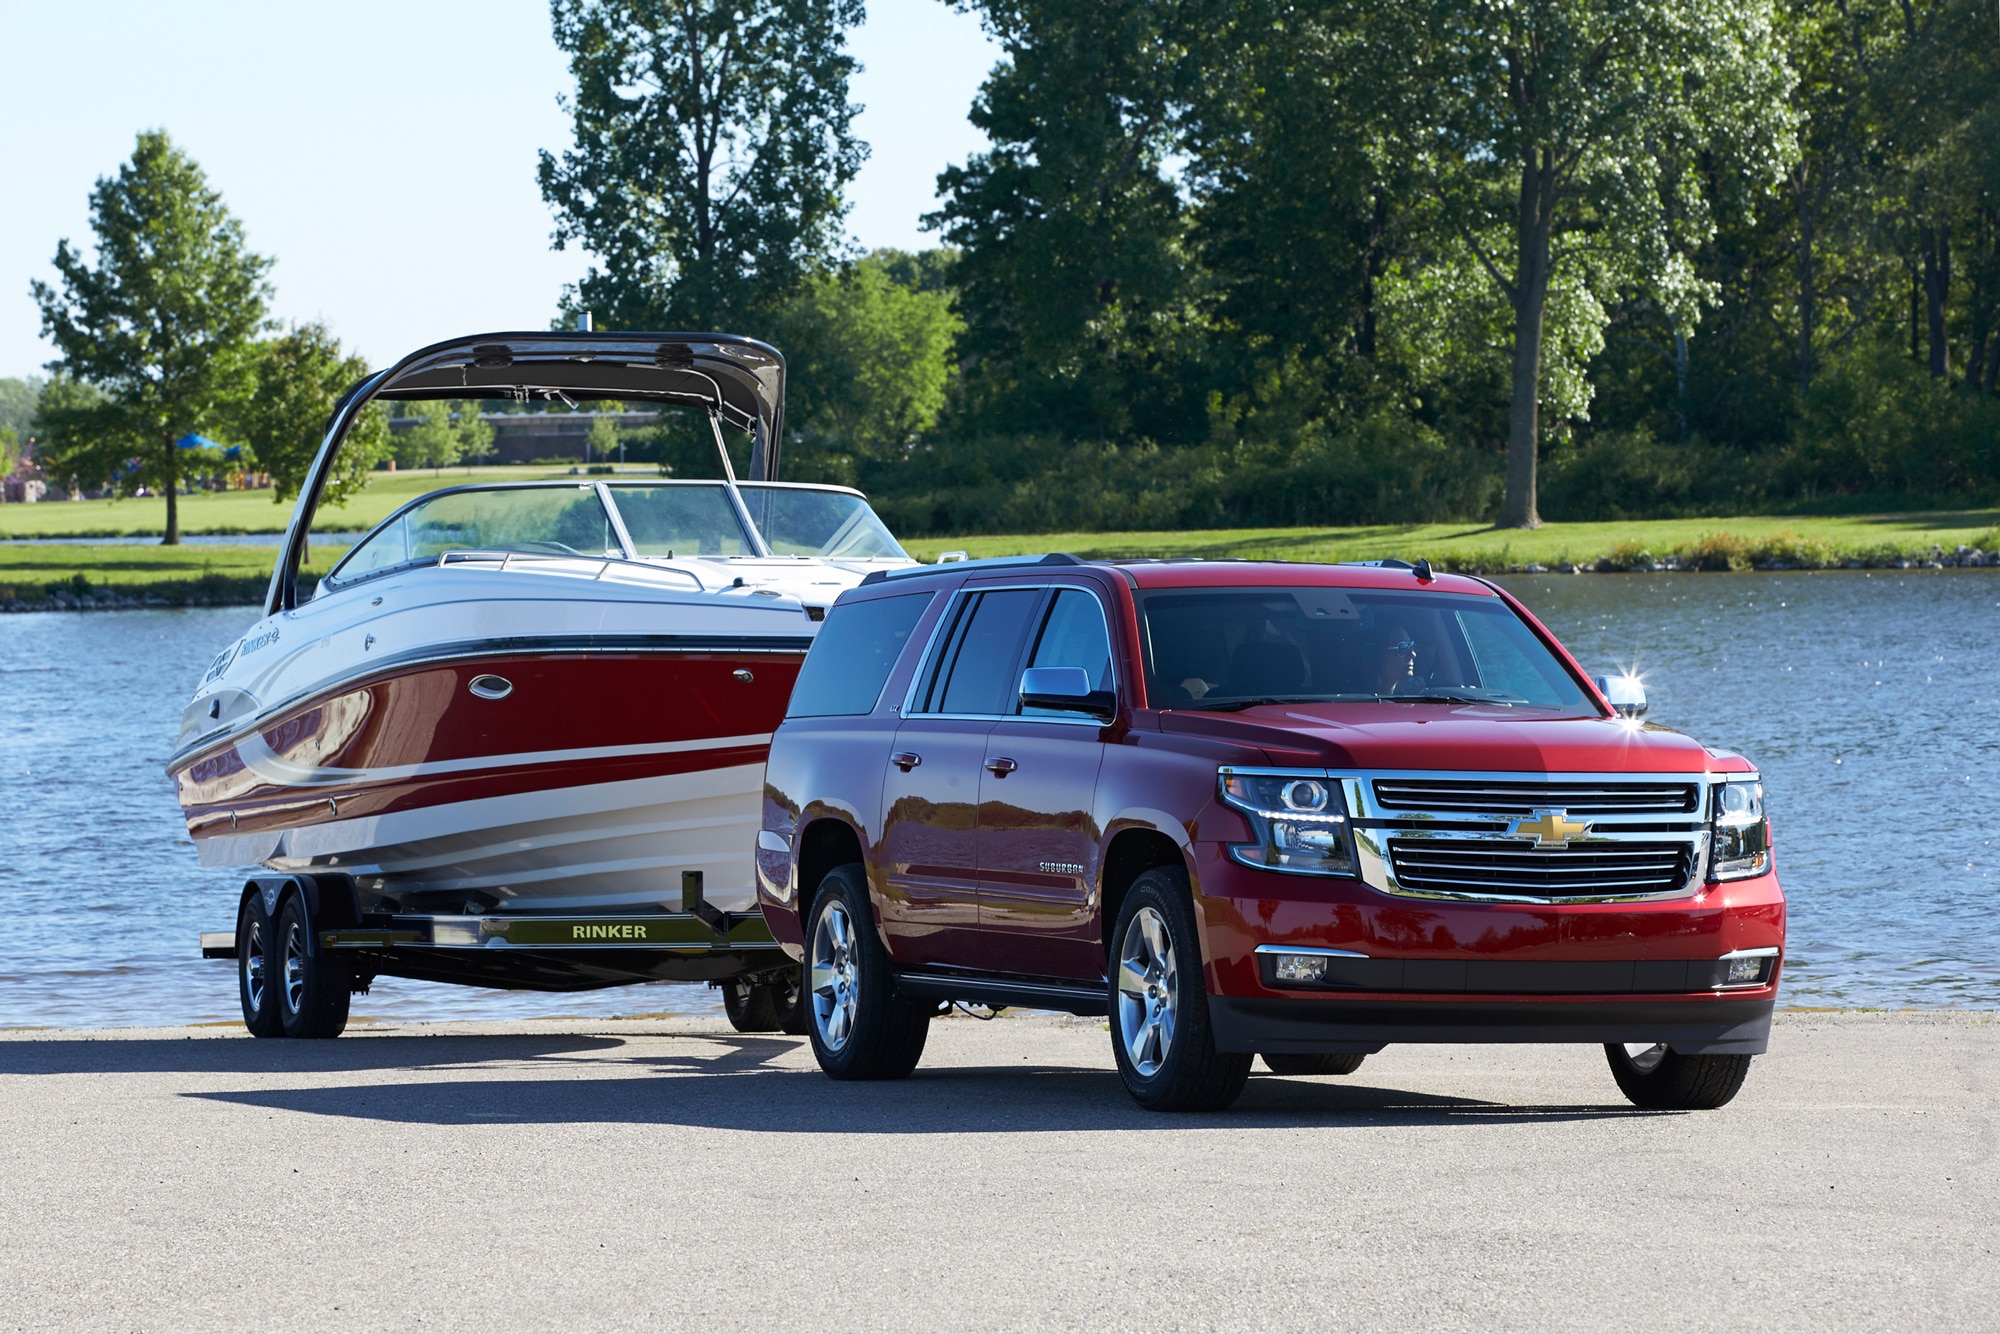 2015 Chevrolet Suburban LTZ pulling a Rinker boat by the lake